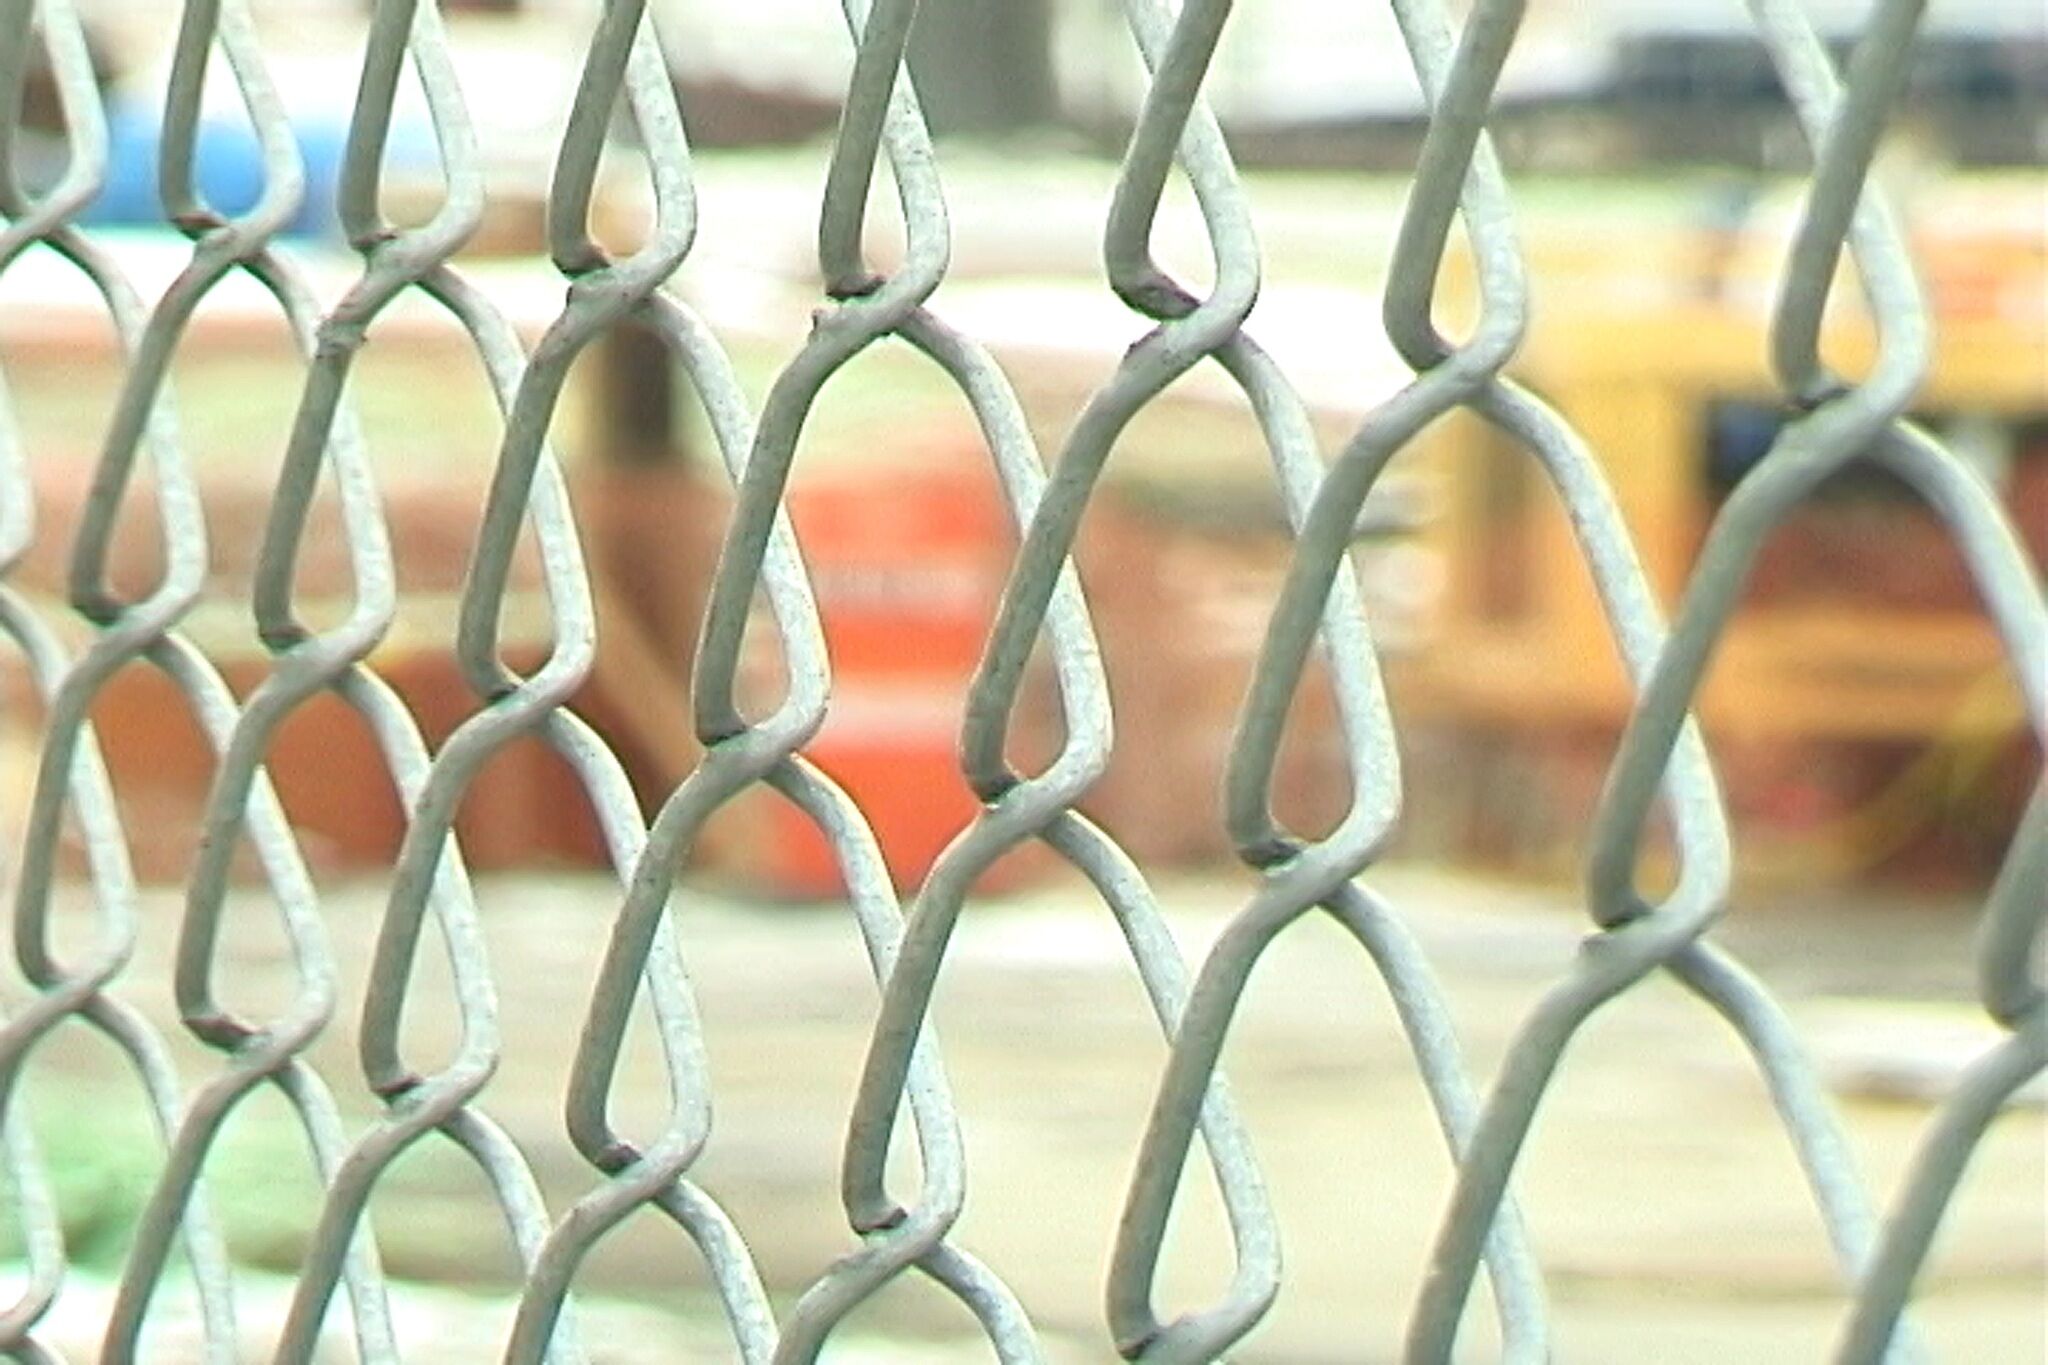 A video still of a wire fence up close.